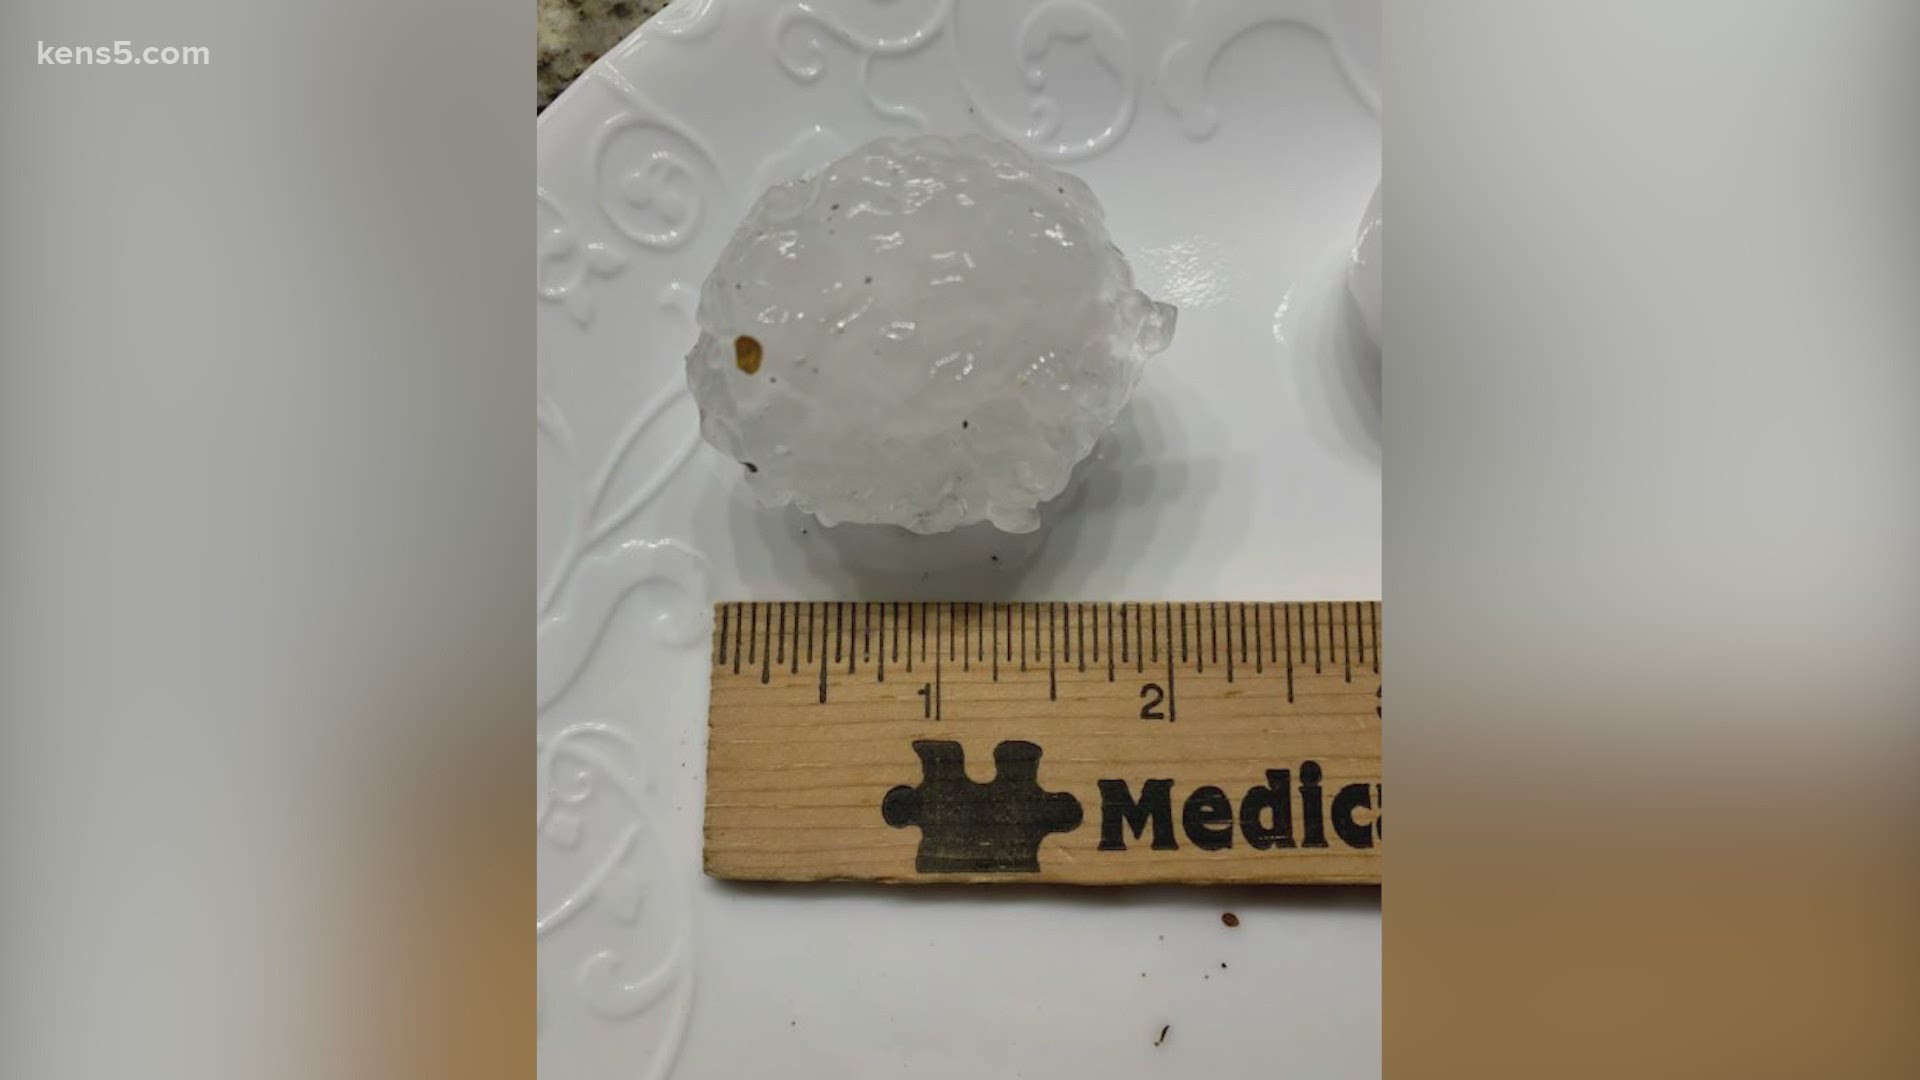 Check out these pictures of hail that fell in New Braunfels measuring about 2 inches. It was just one of many areas on the outskirts of San Antonio that saw hail.